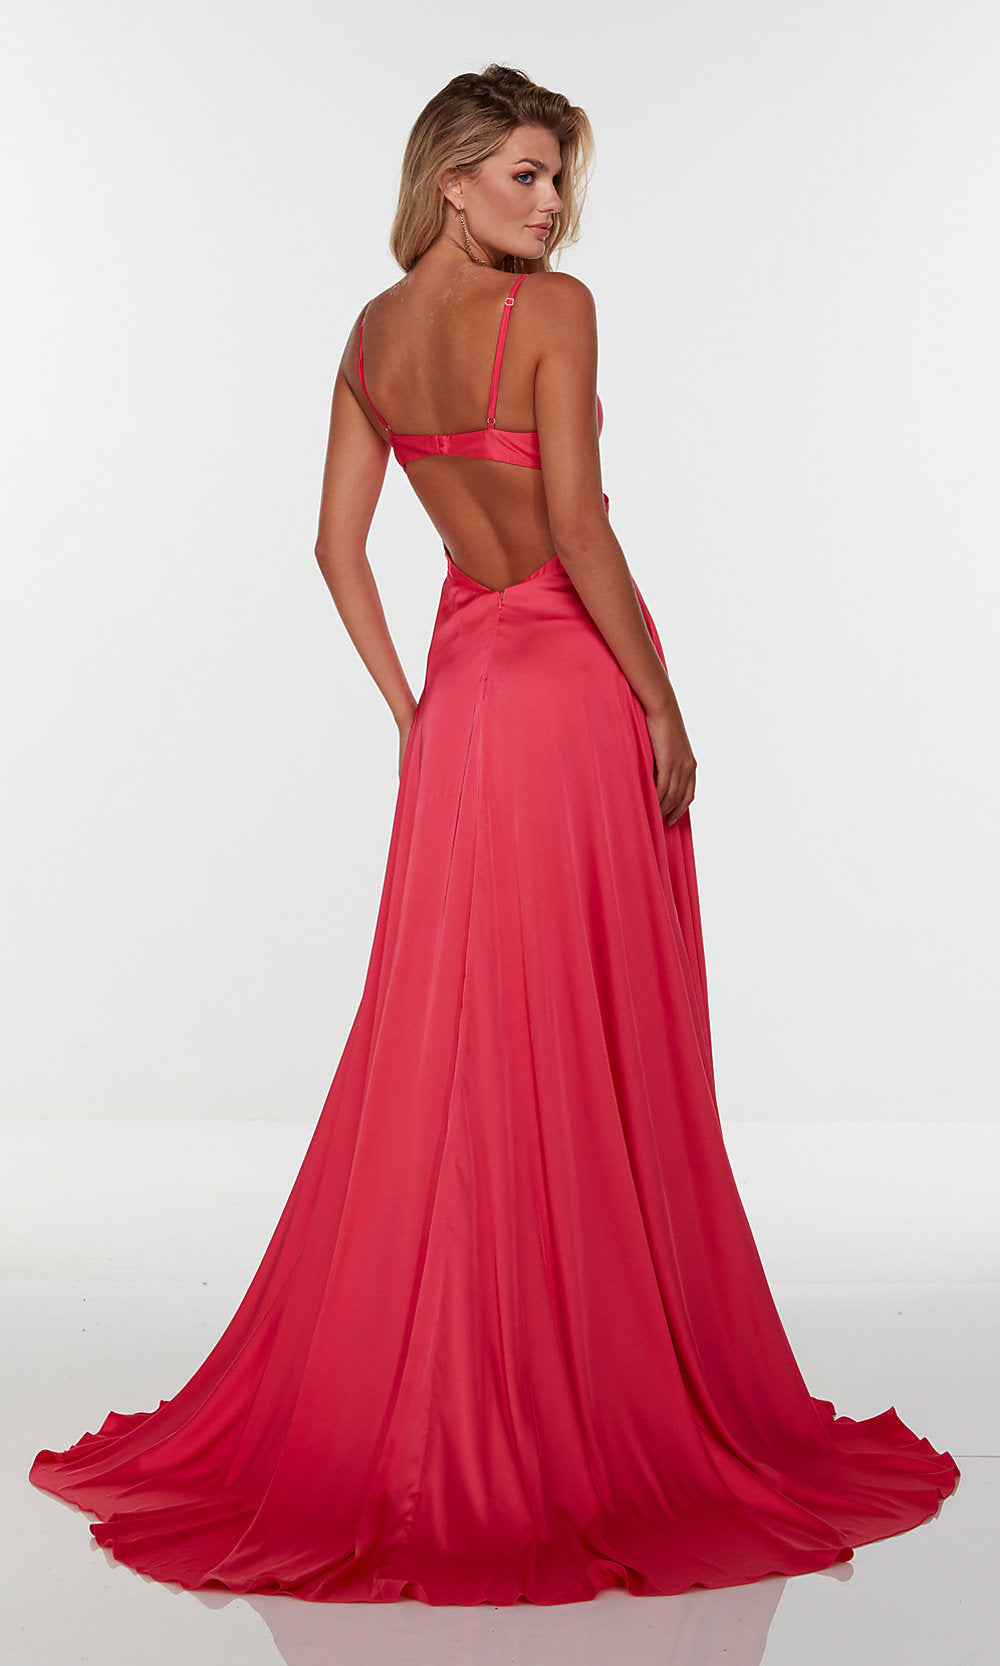 Hot Pink Alyce Hot Pink Long Prom Dress with Double Slits